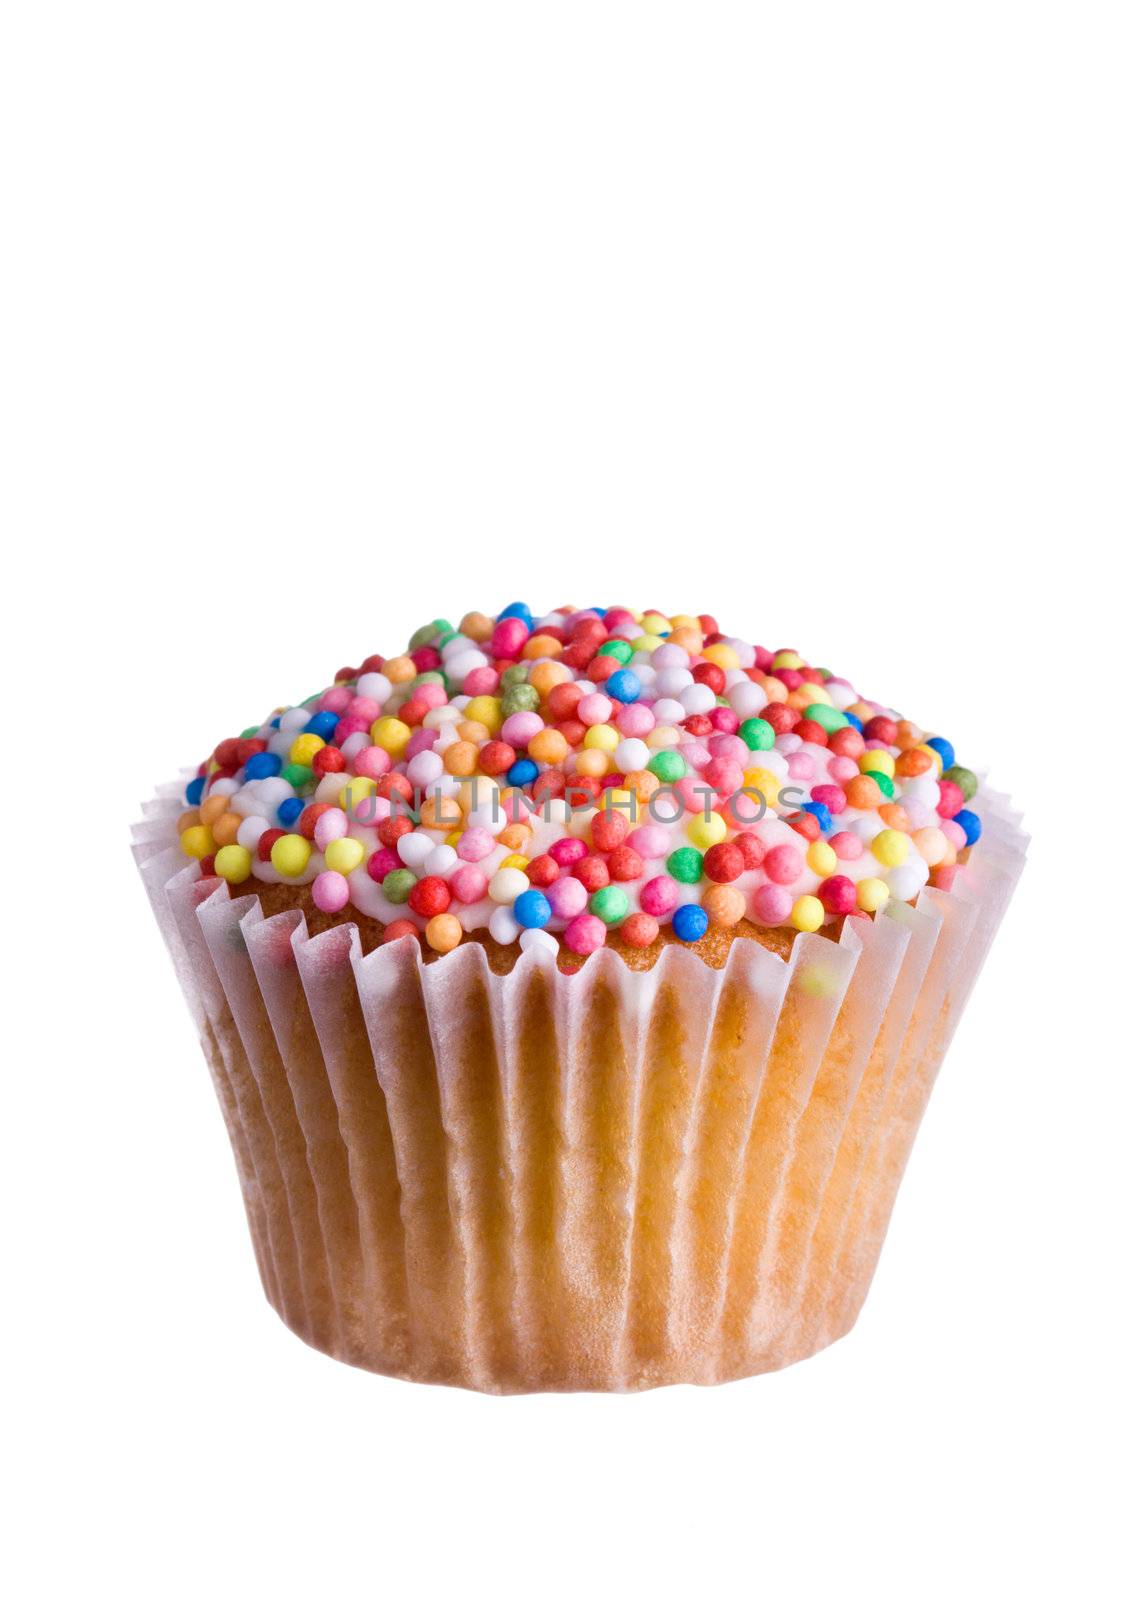 Cupcake decorated with colored sugar sprinkles